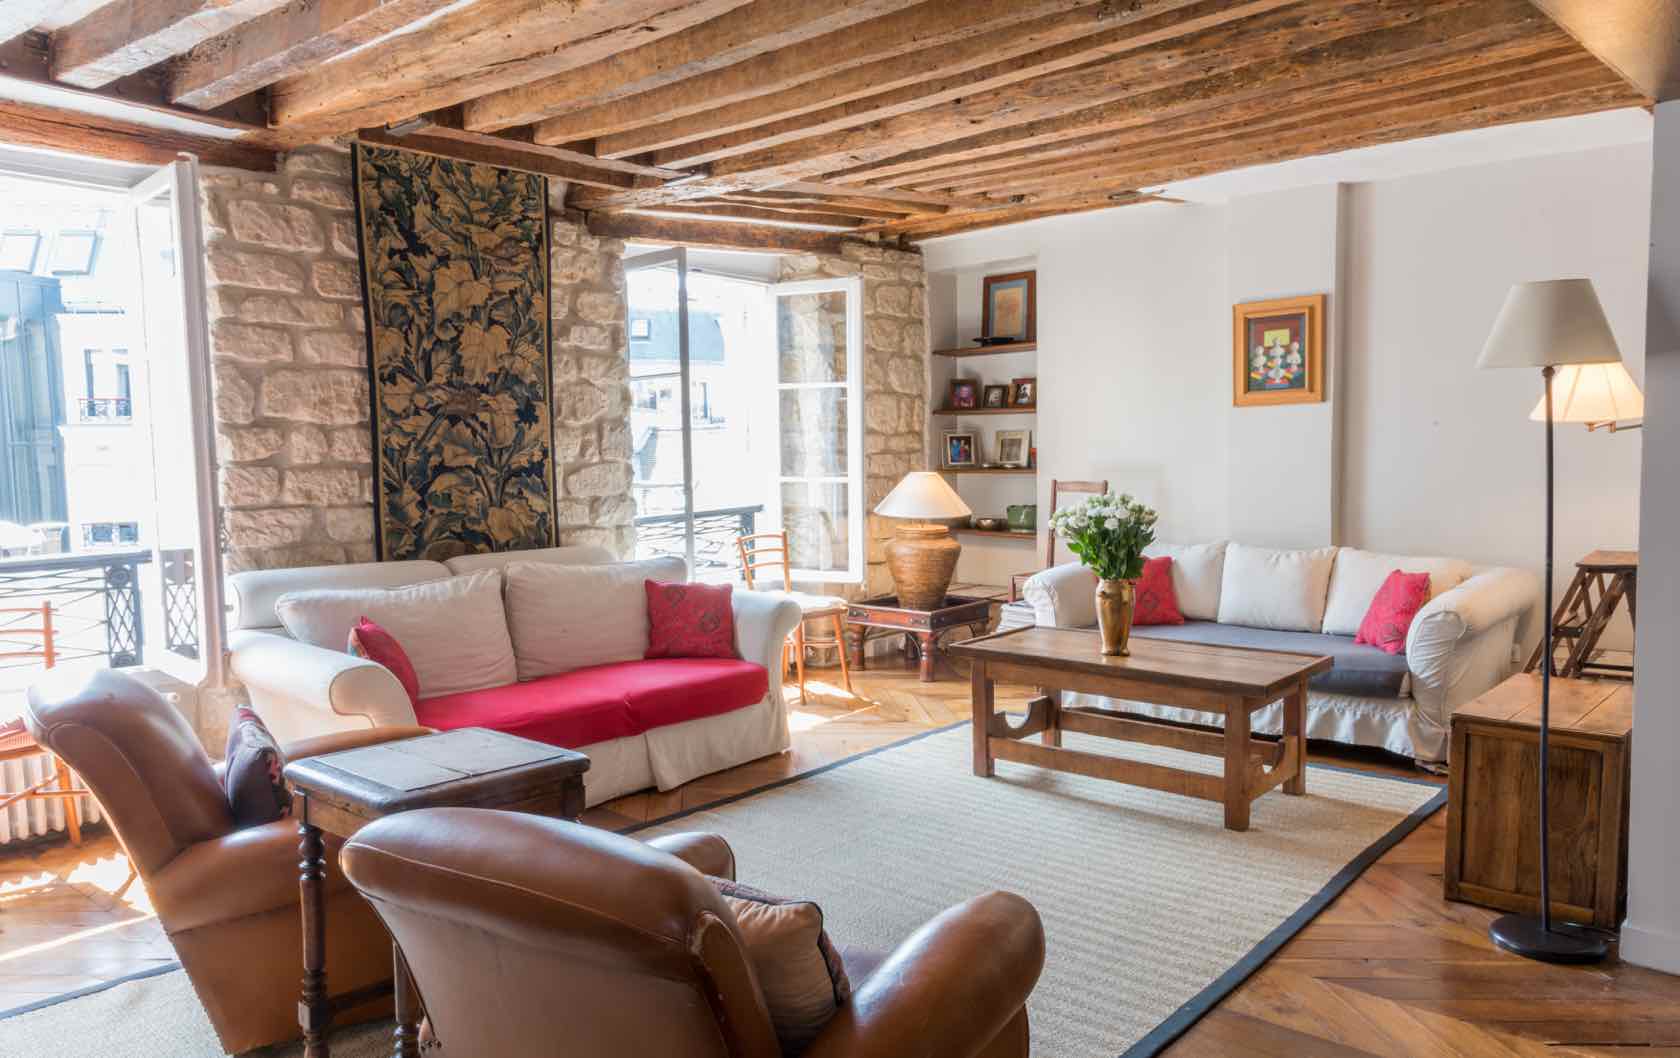 The Dolcetto Apartment – Old-World Comfort in Saint-Germain-des-Près